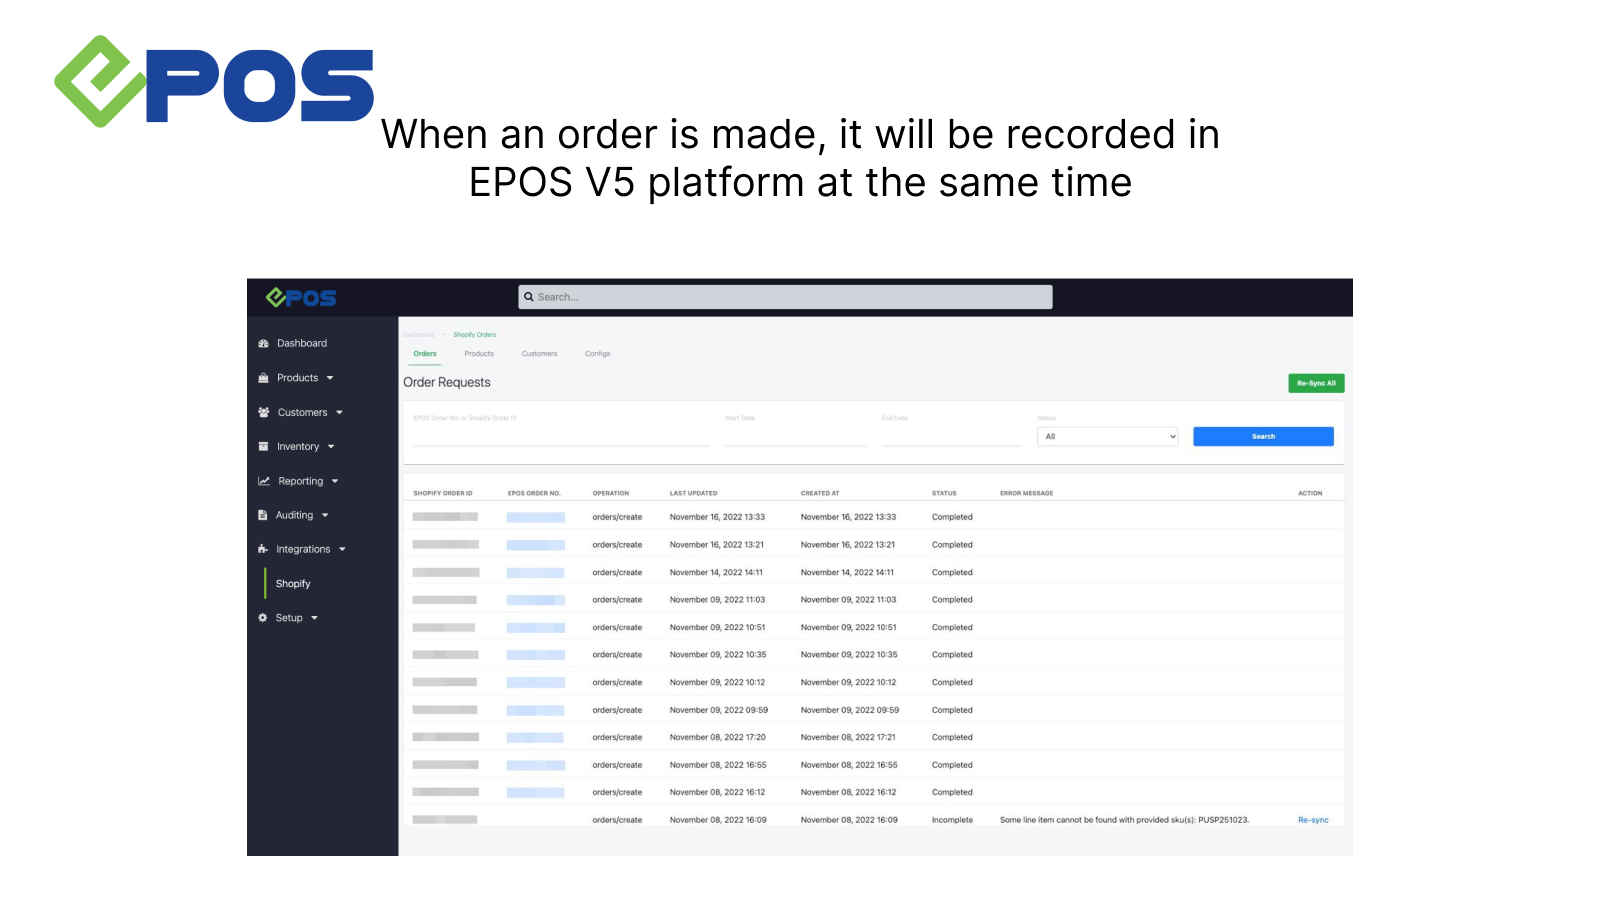 When an order is made, it will be recorded in EPOS V5 platform